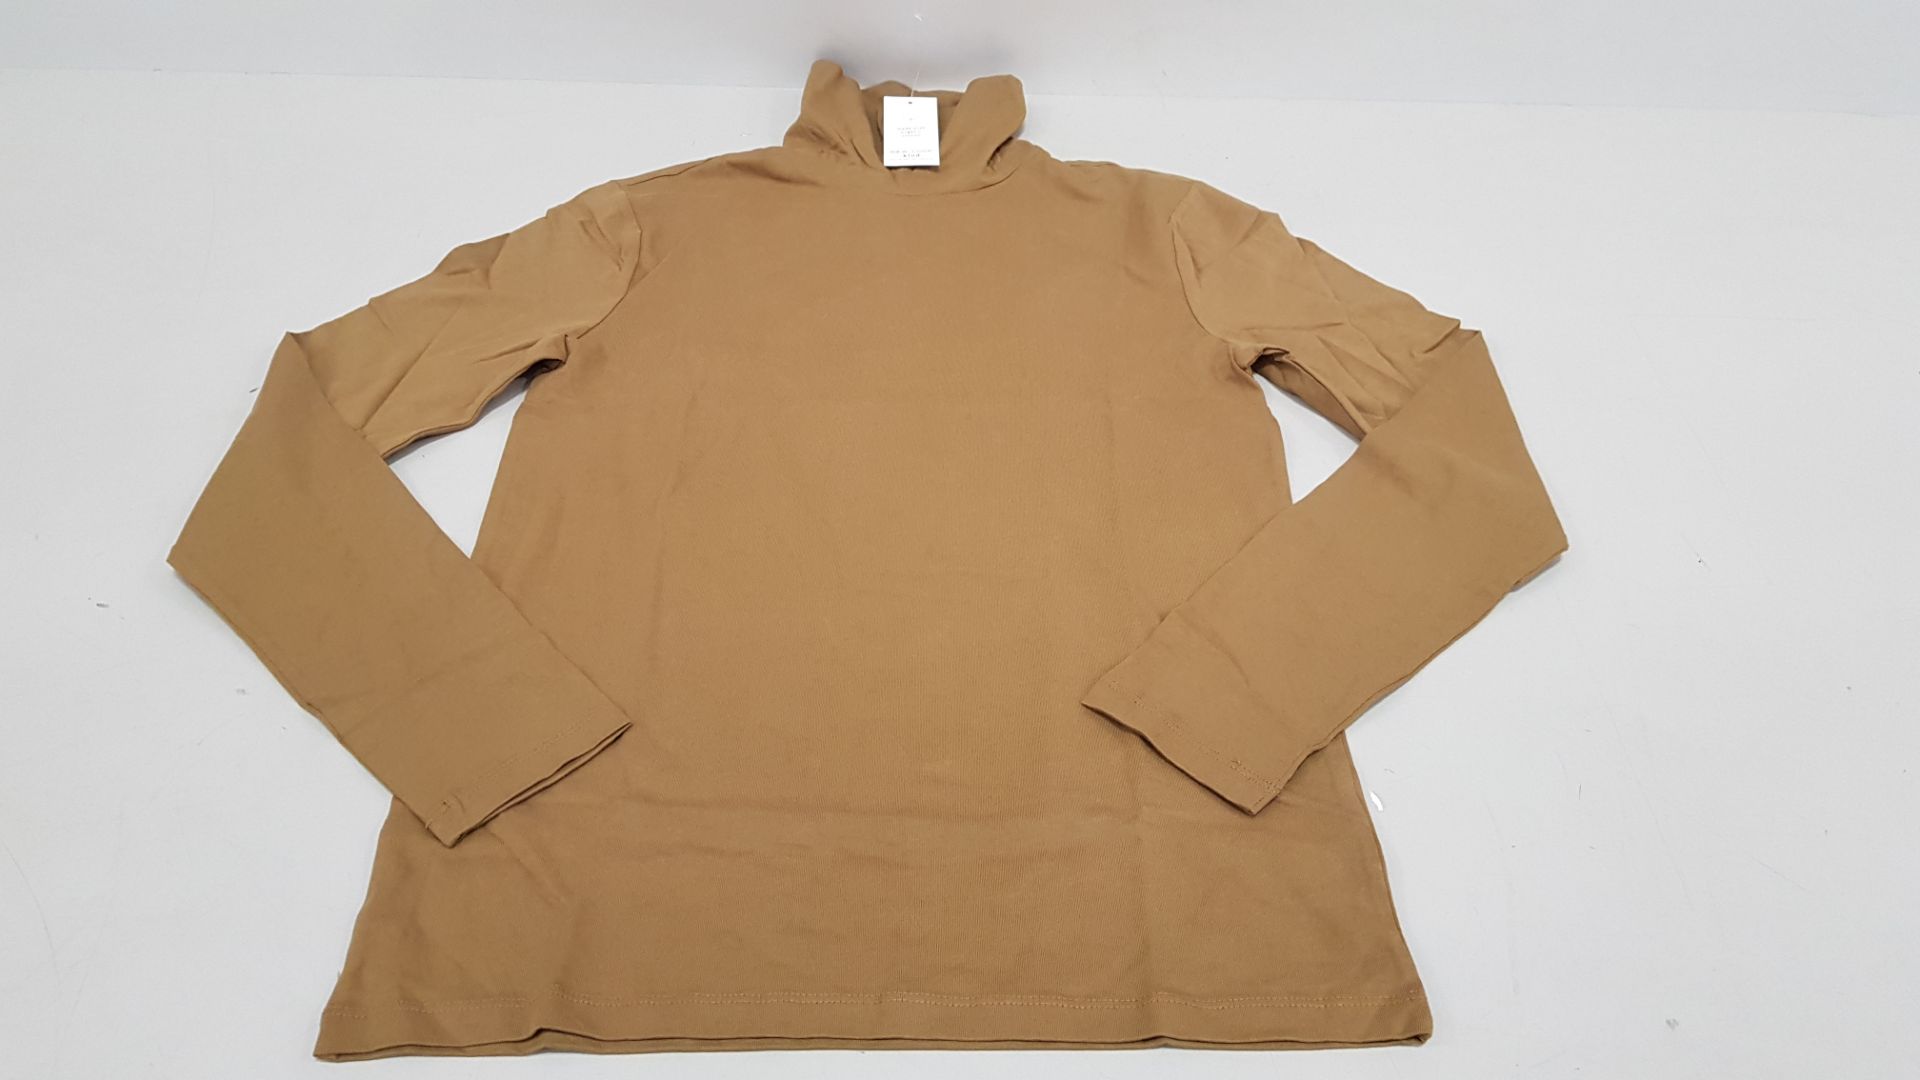 52 X BRAND NEW NEW LOOK TAN COLOURED LONG SLEEVED SHIRTS WITH ROLL NECK - IN SIZE SMALL *MADE WITH